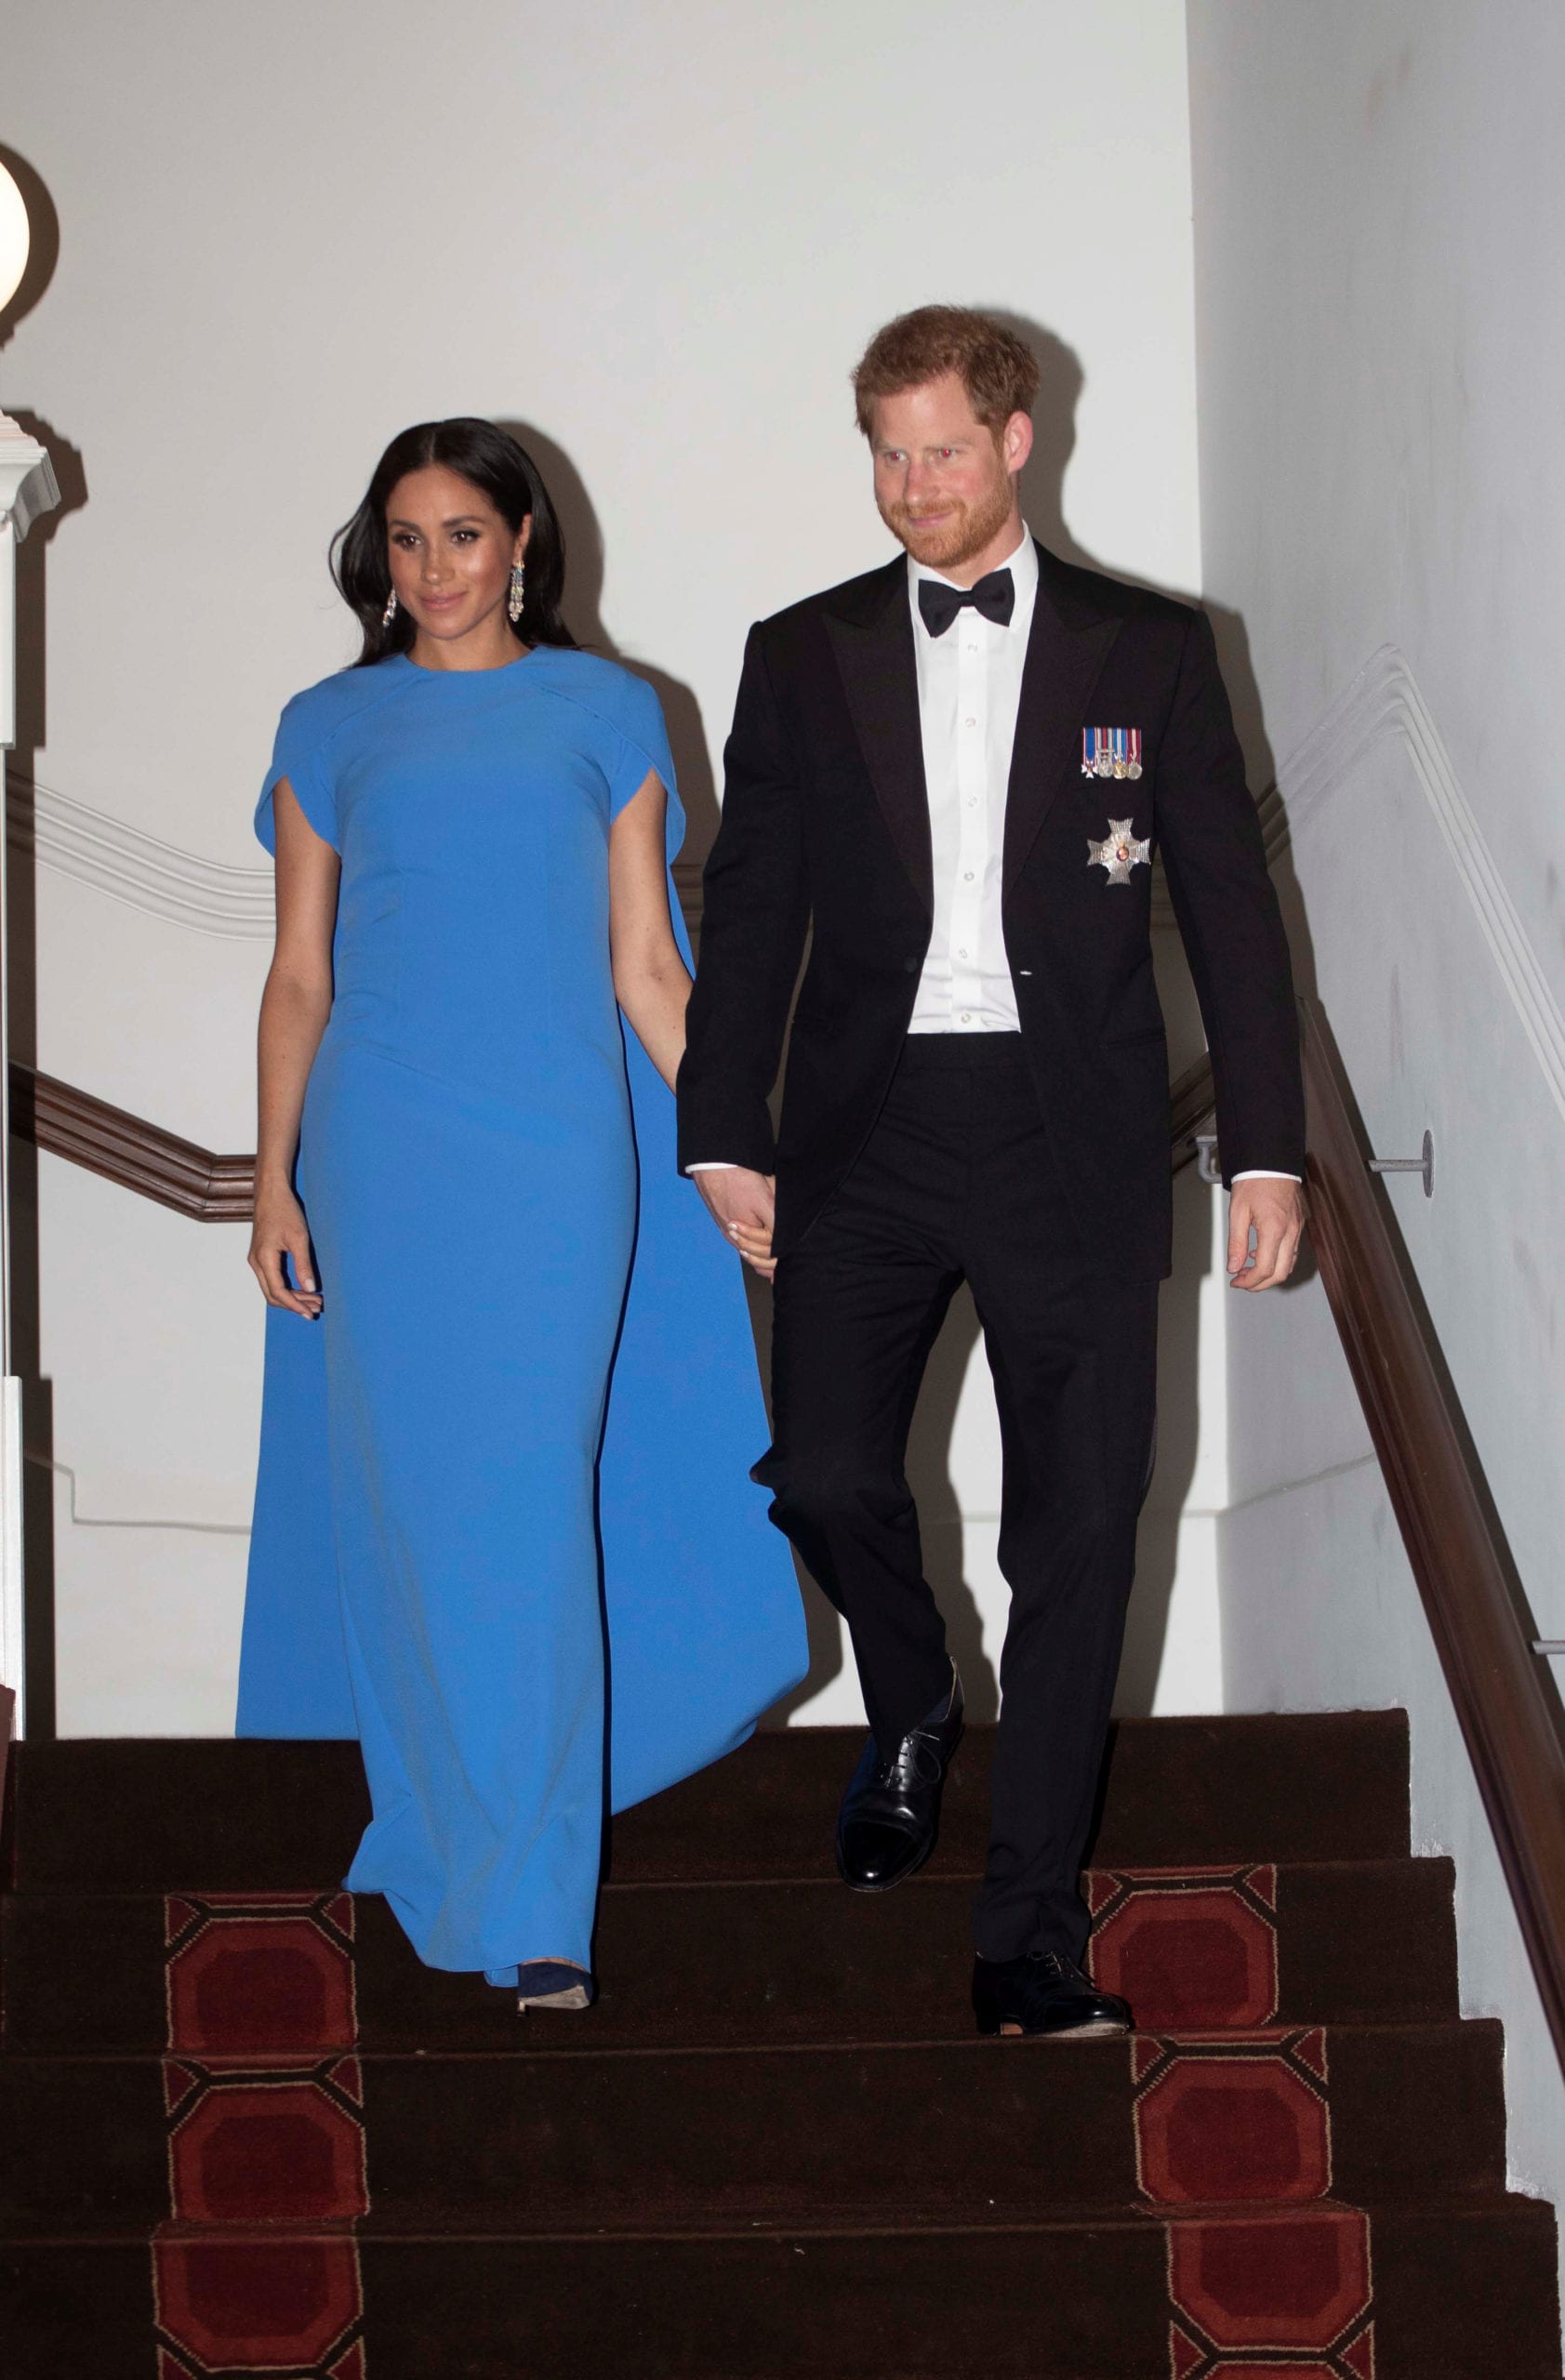 Britain's Prince Harry and Meghan, the Duchess of Sussex, arrive for a reception and state dinner at Grand Pacific Hotel in Suva, Fiji October 23, 2018. Ian Vogler/Pool via REUTERS - RC1F96462330